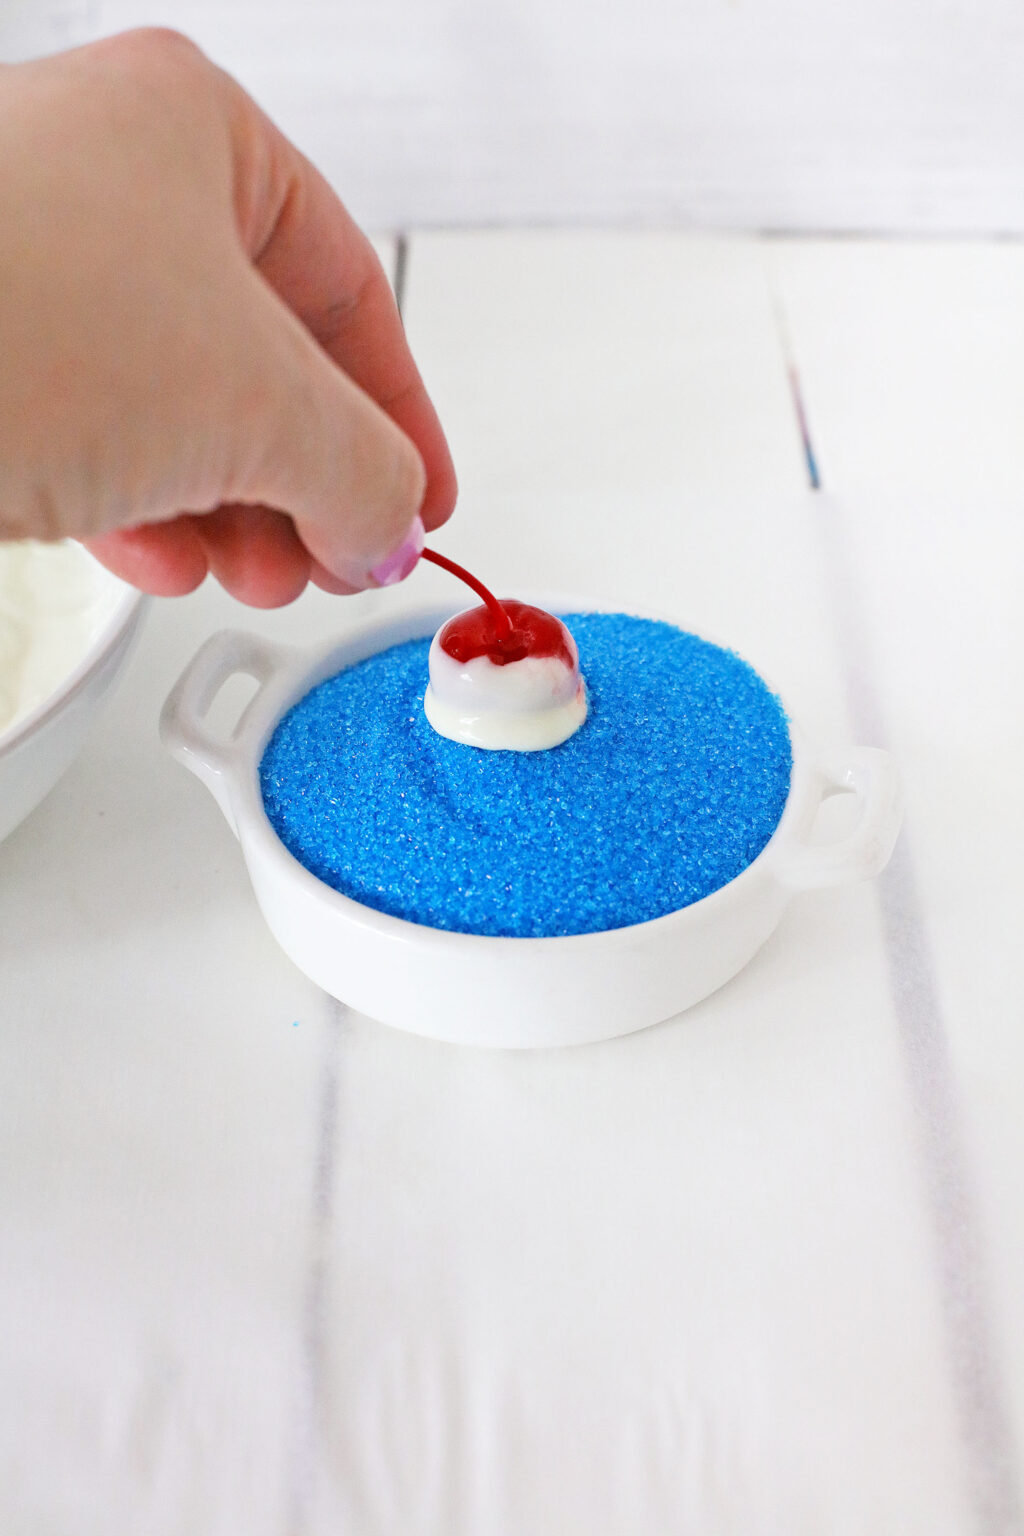 woman's hand dipping chocolate dipped cherry into blue sprinkles